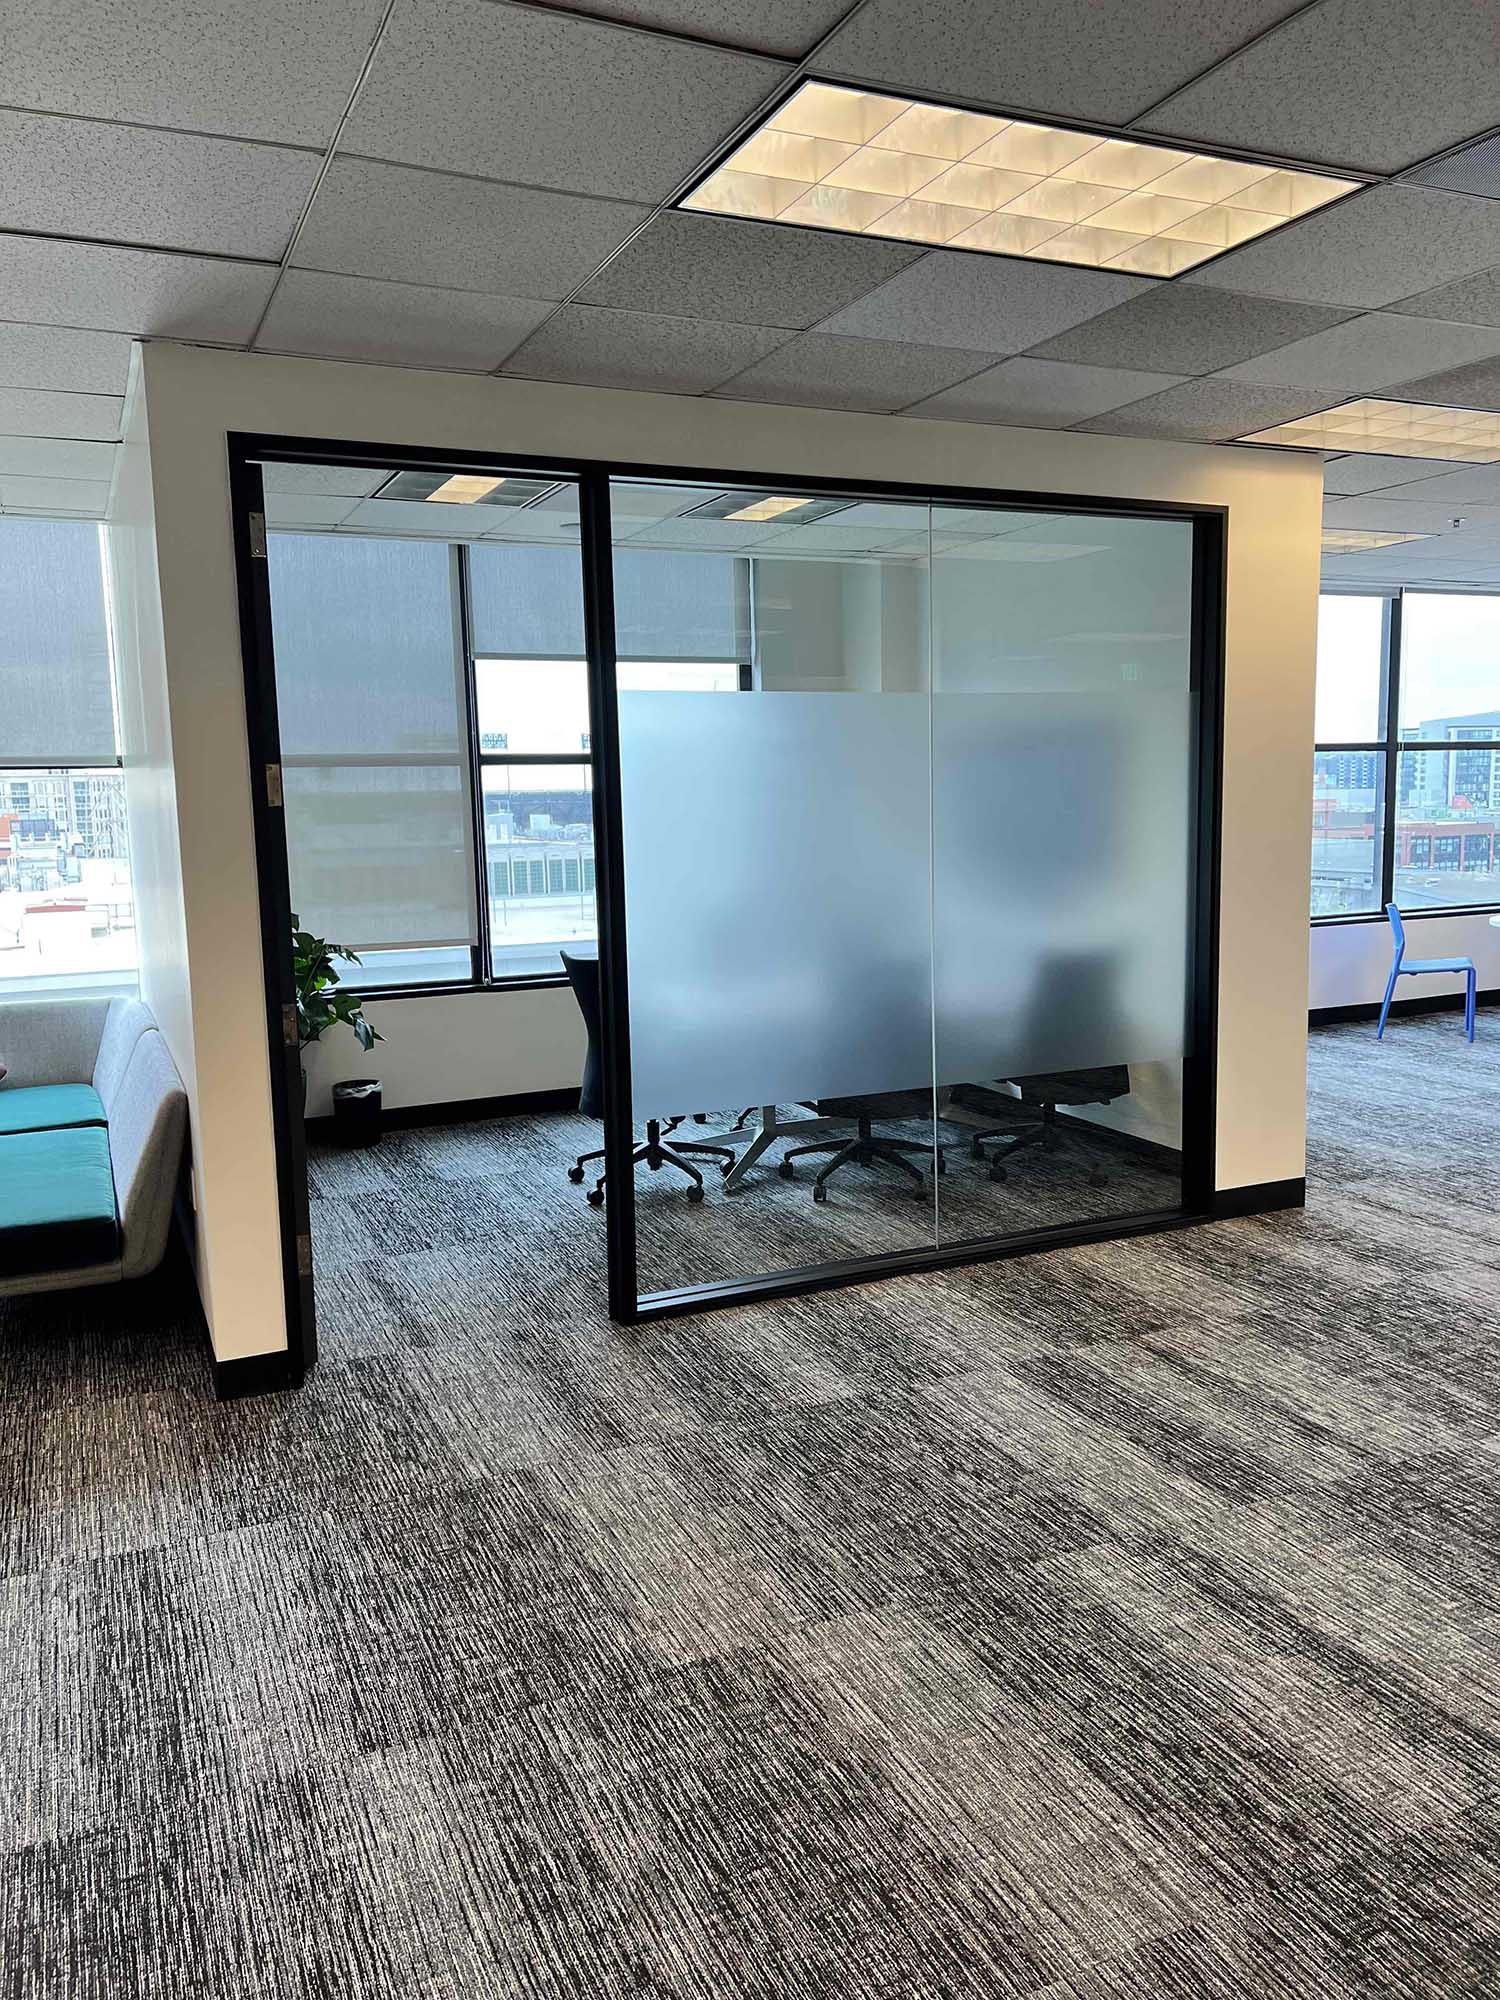 3M Privacy Window film for a San Francisco Office, installed by ClimatePro.